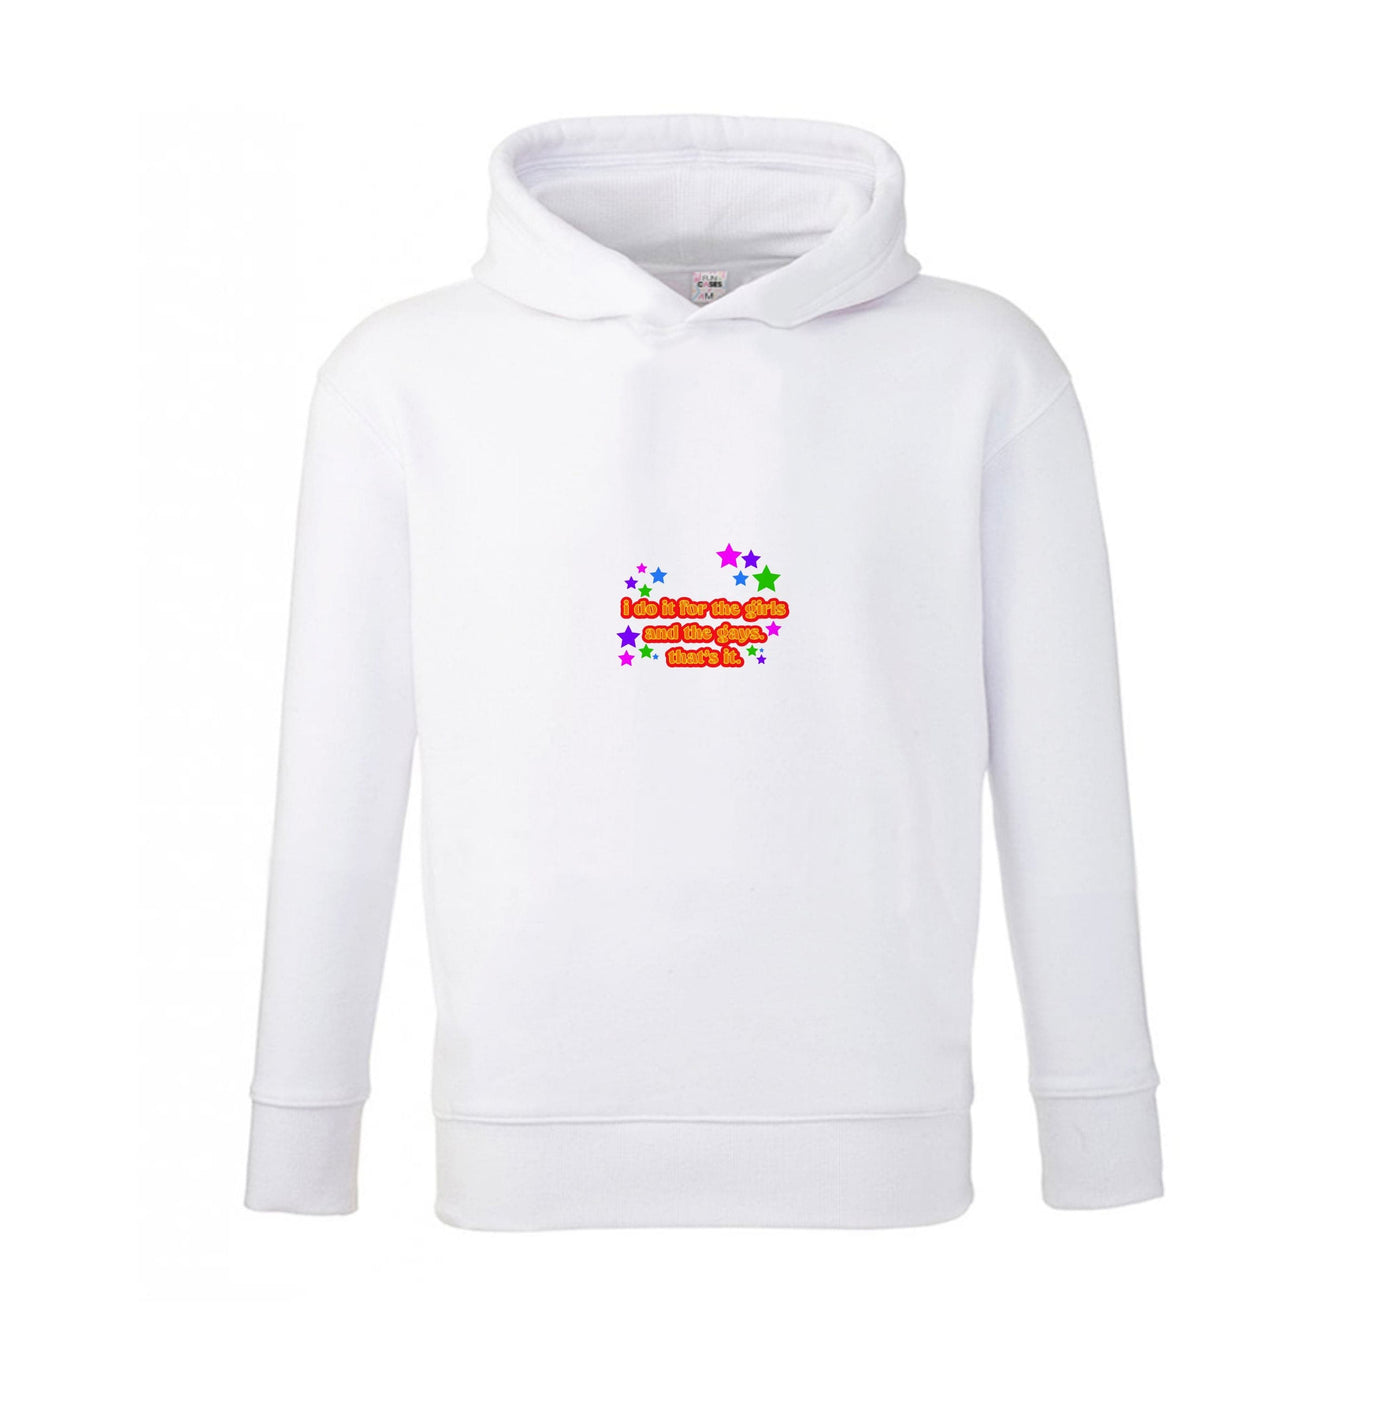 I do it for the girls and the gays - Pride Kids Hoodie